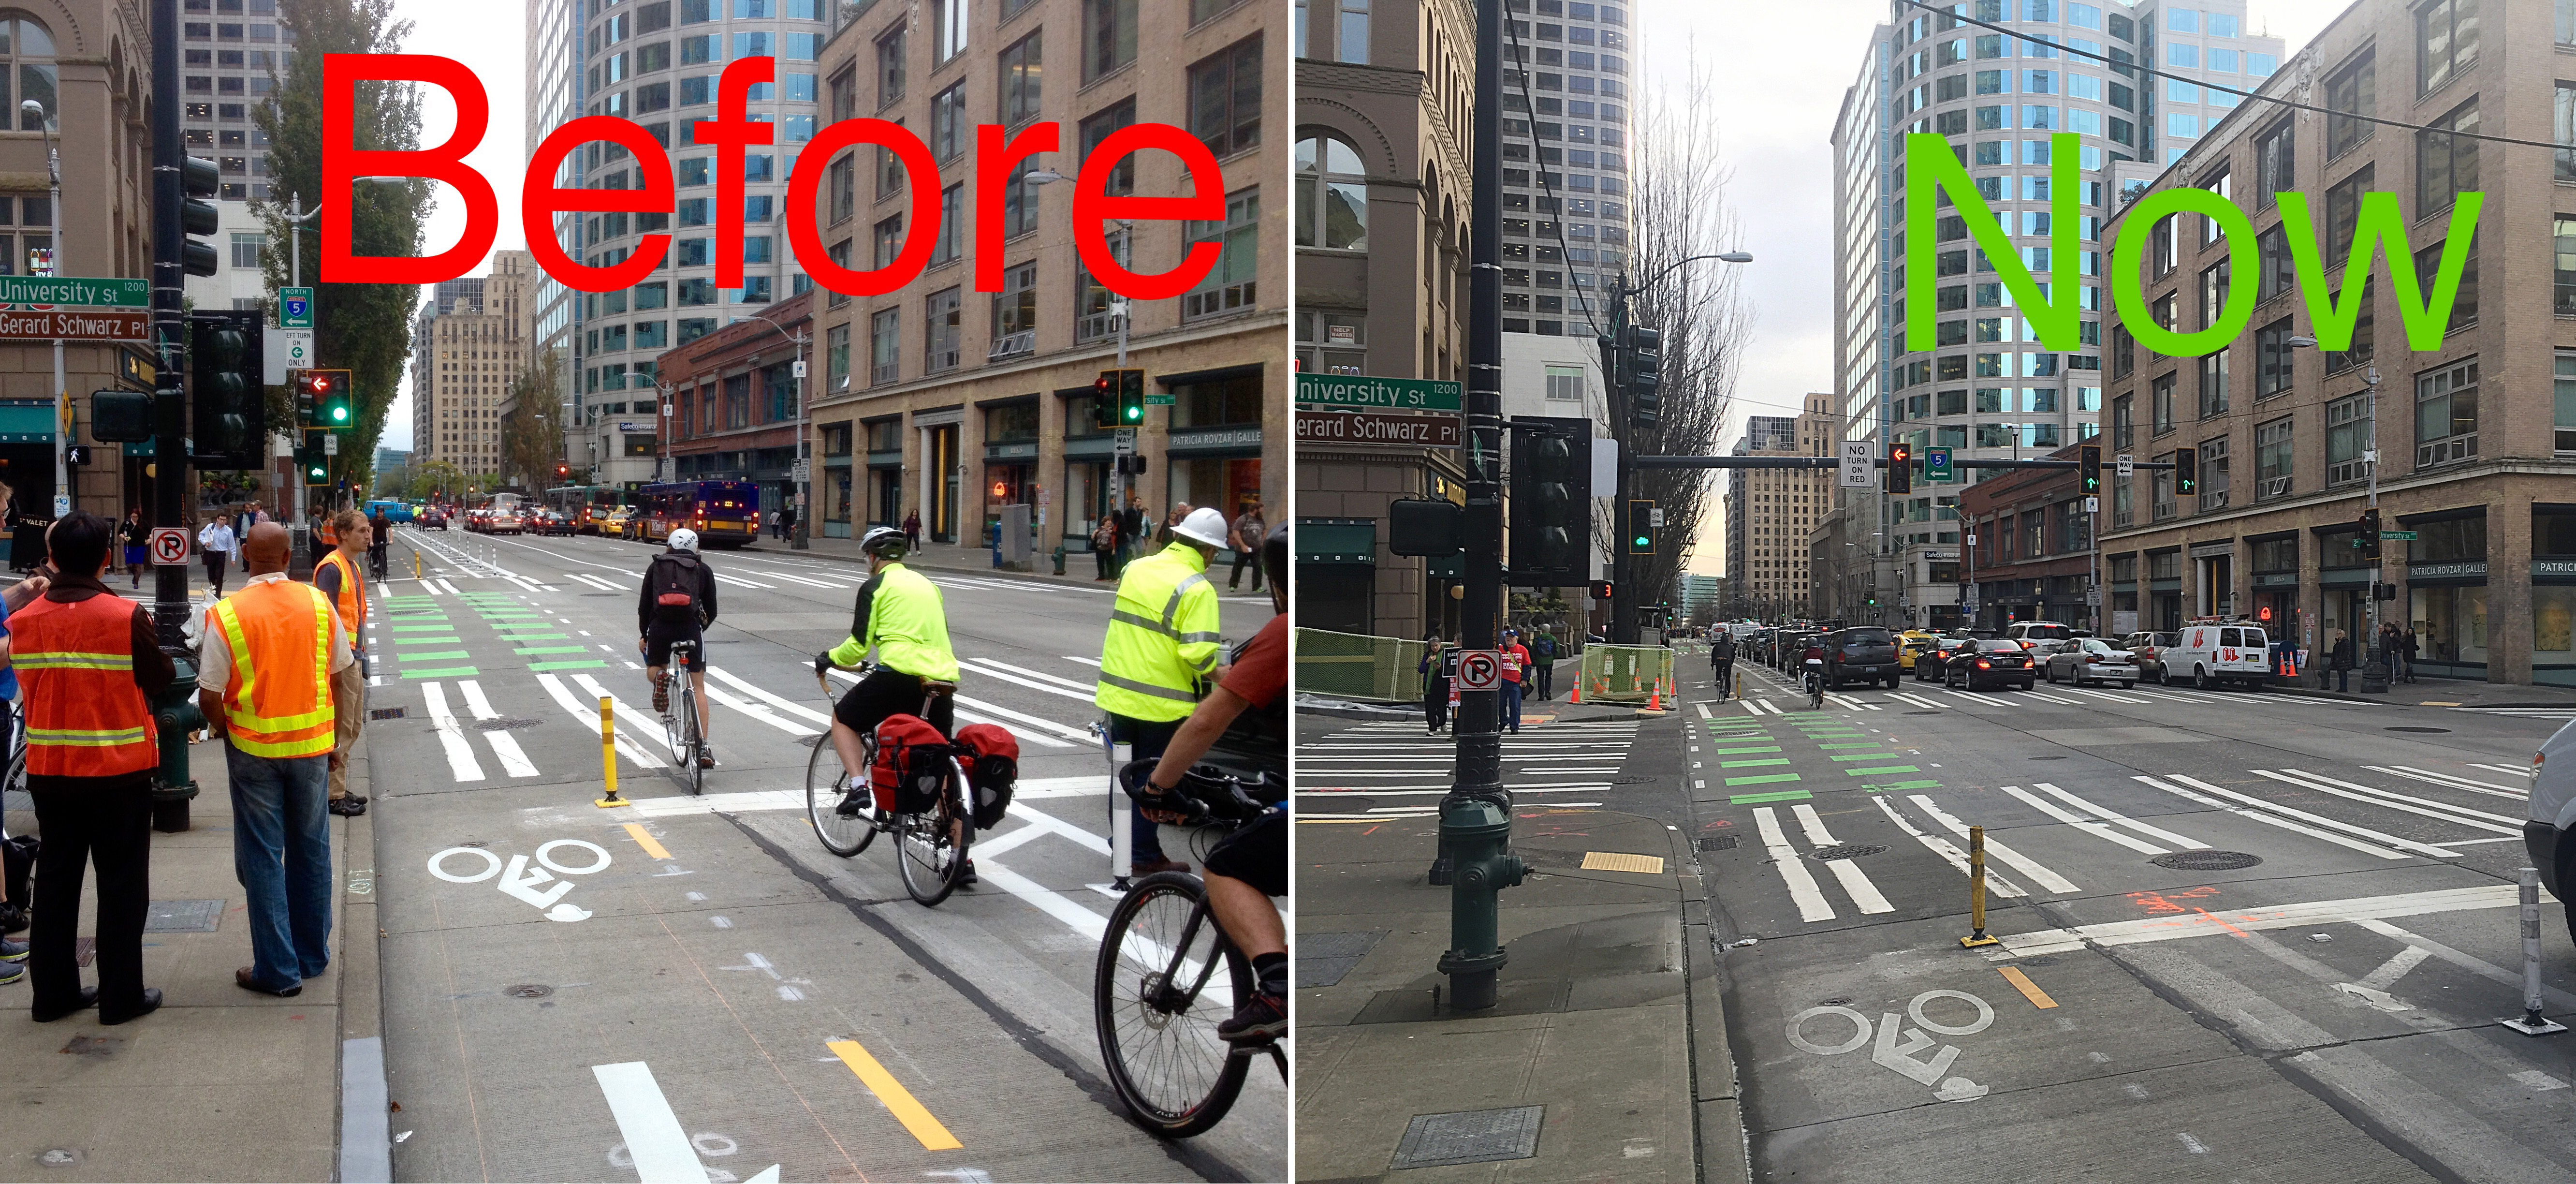 New 2nd Ave traffic signals clear up confusion | Seattle Bike Blog